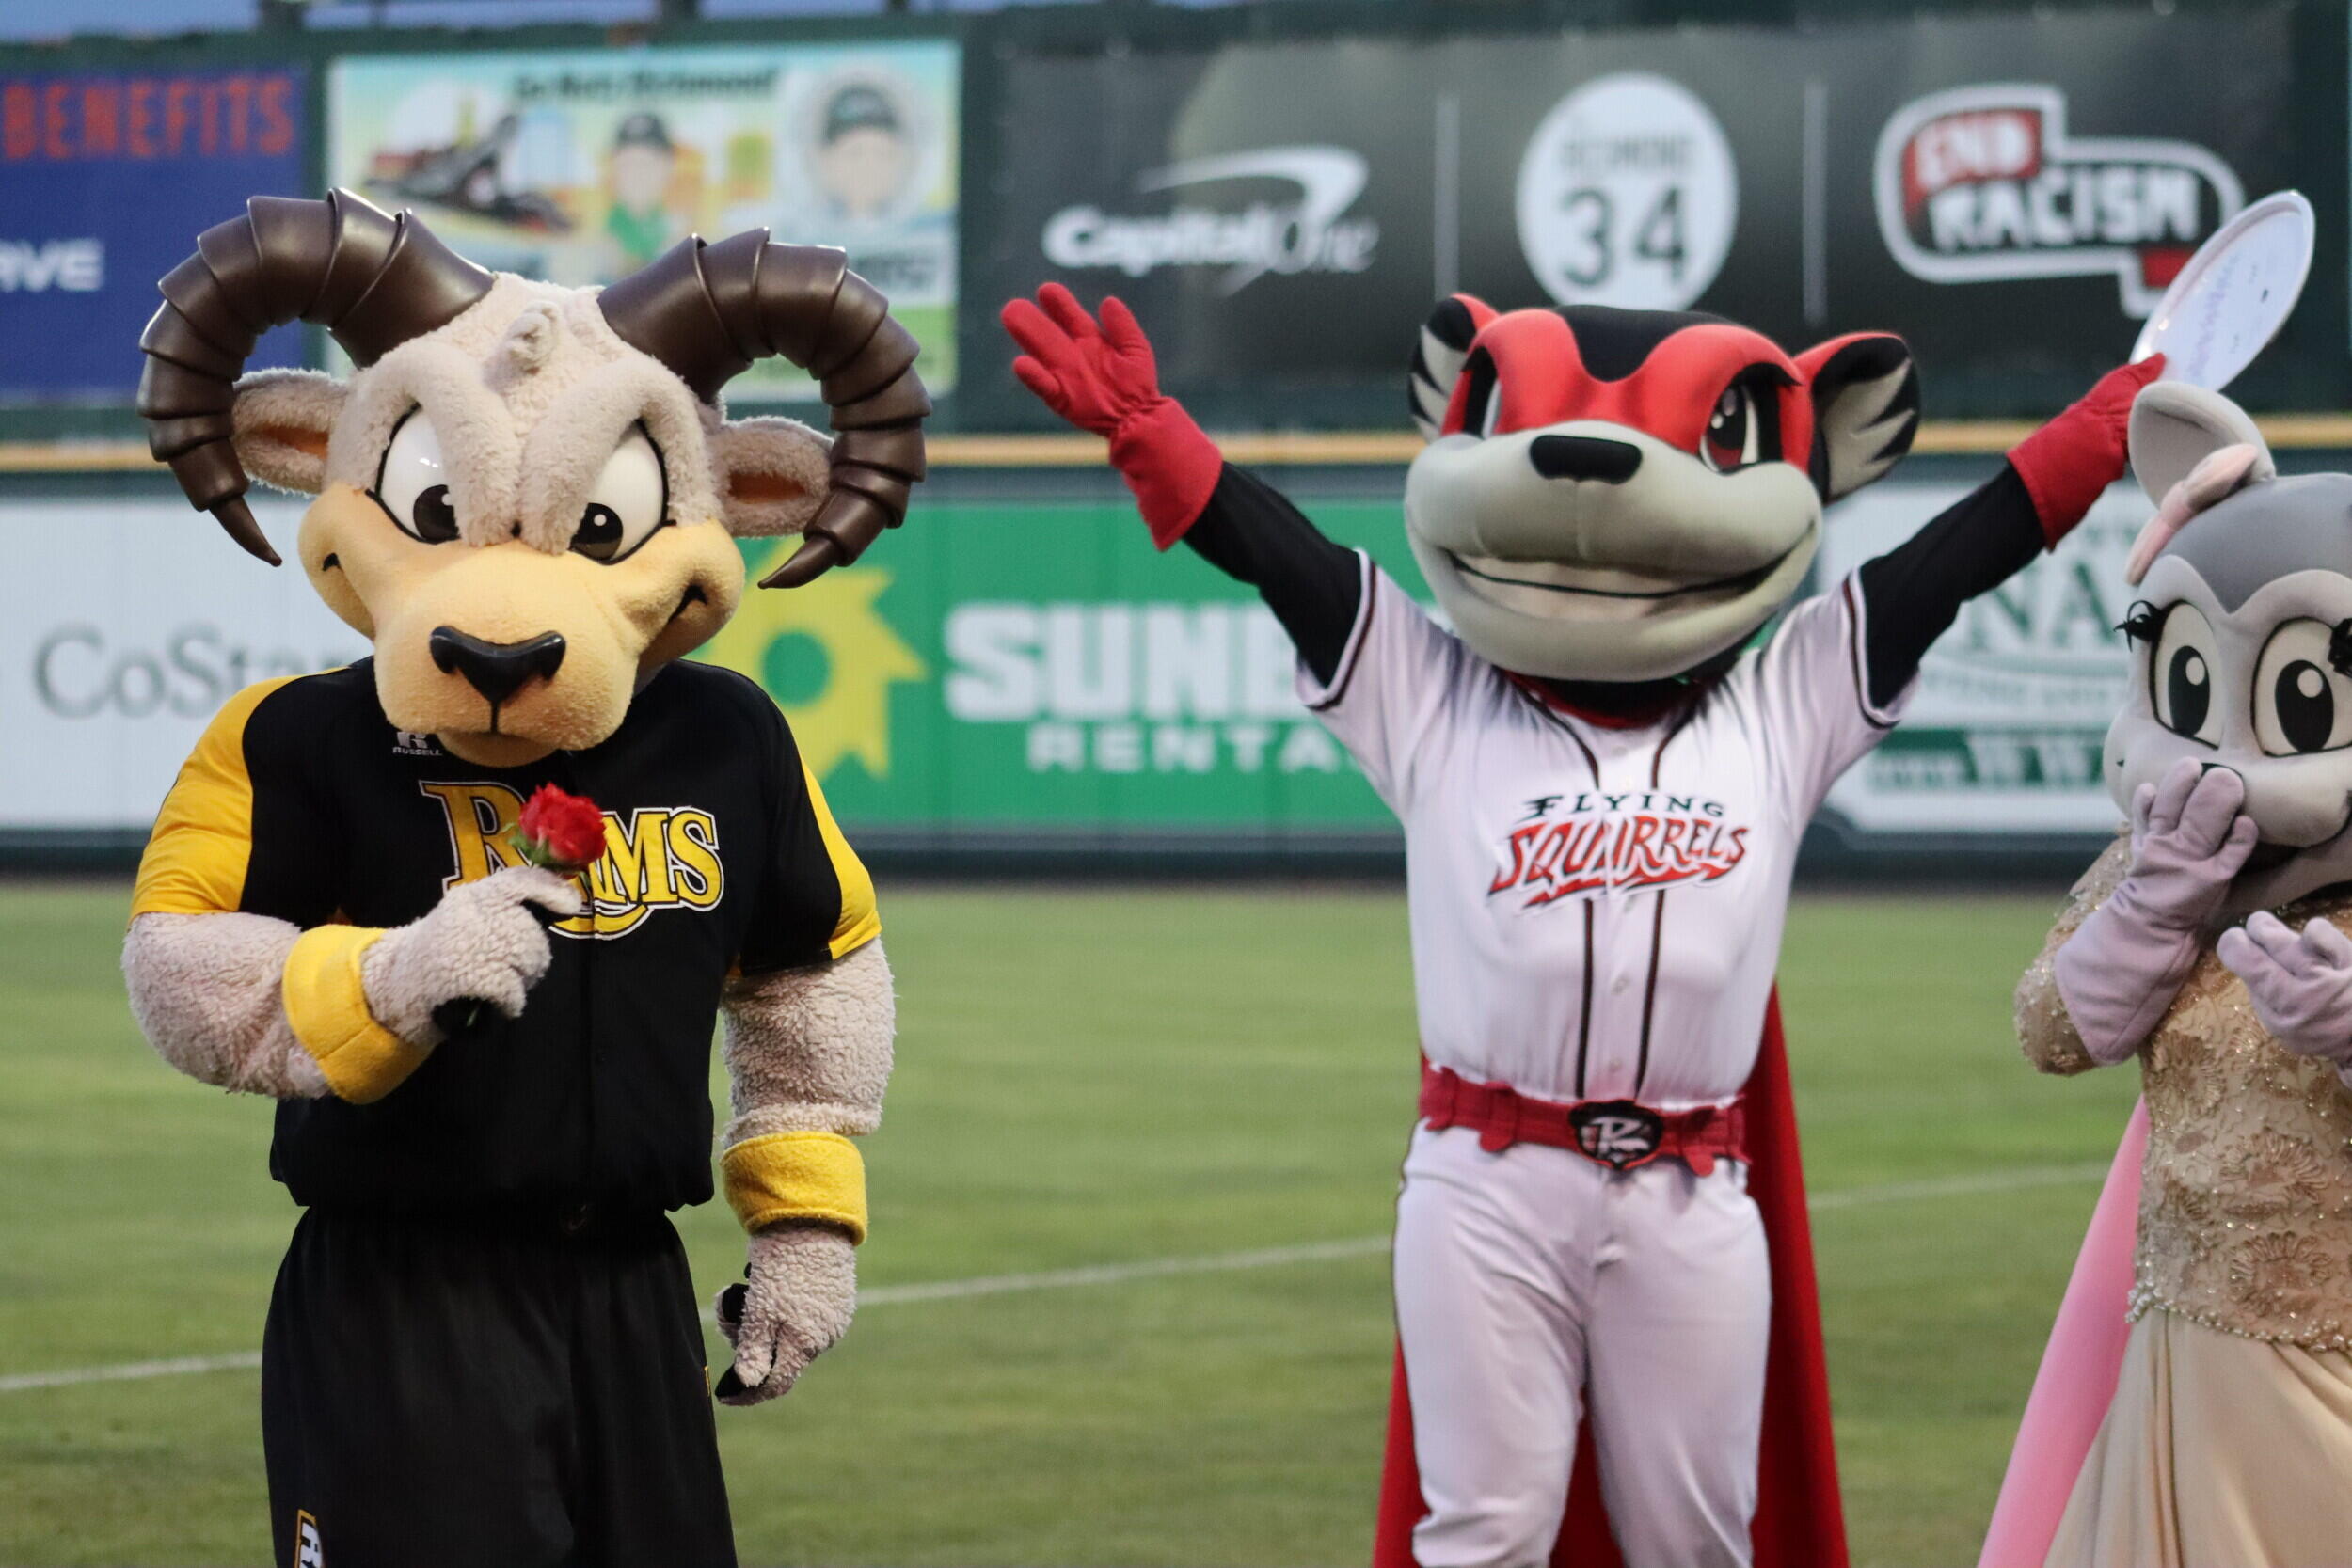 Rodney the Ram holding a rose next to the flying squirrel's mascot.